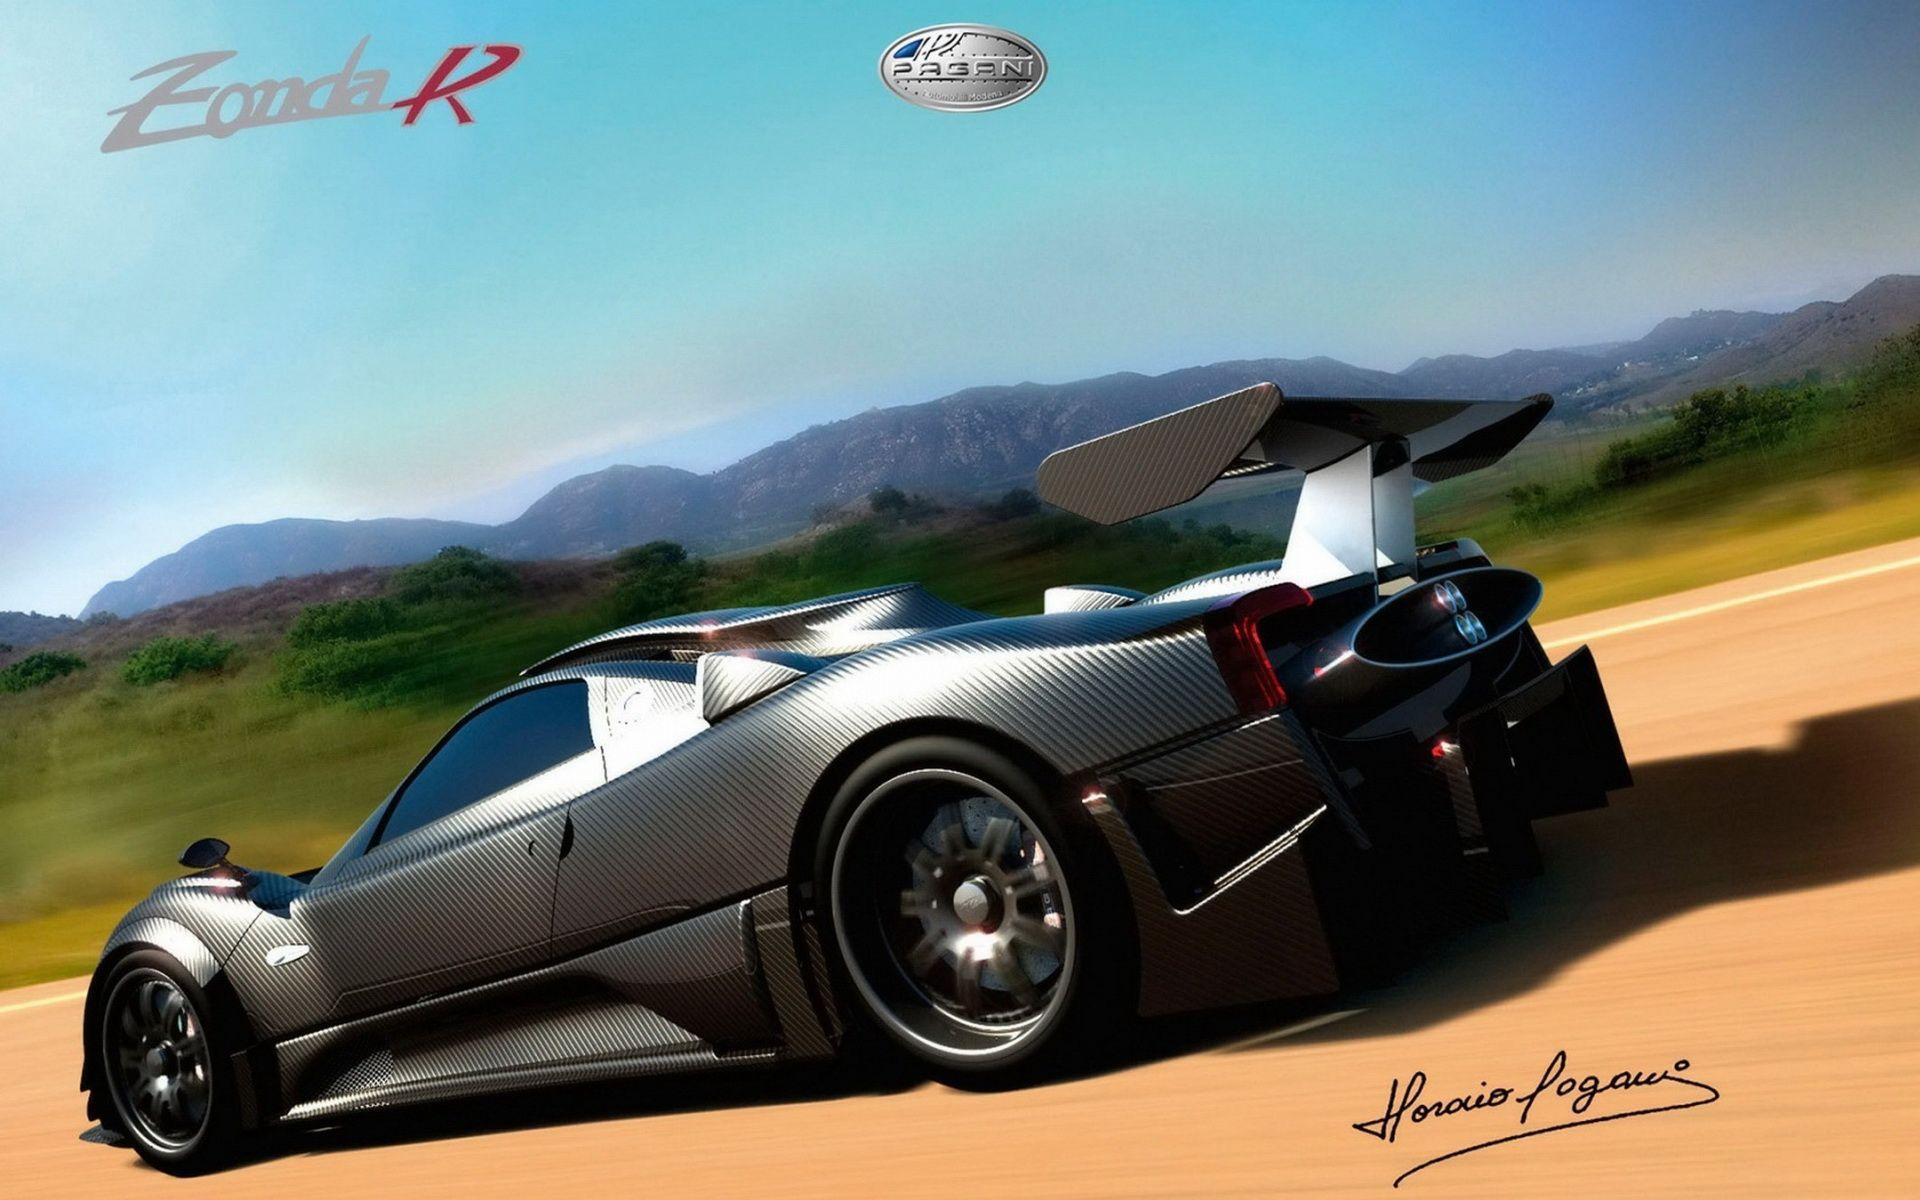 Awesome wallpaper cars albums clipzloadxx cool awesomejpg black